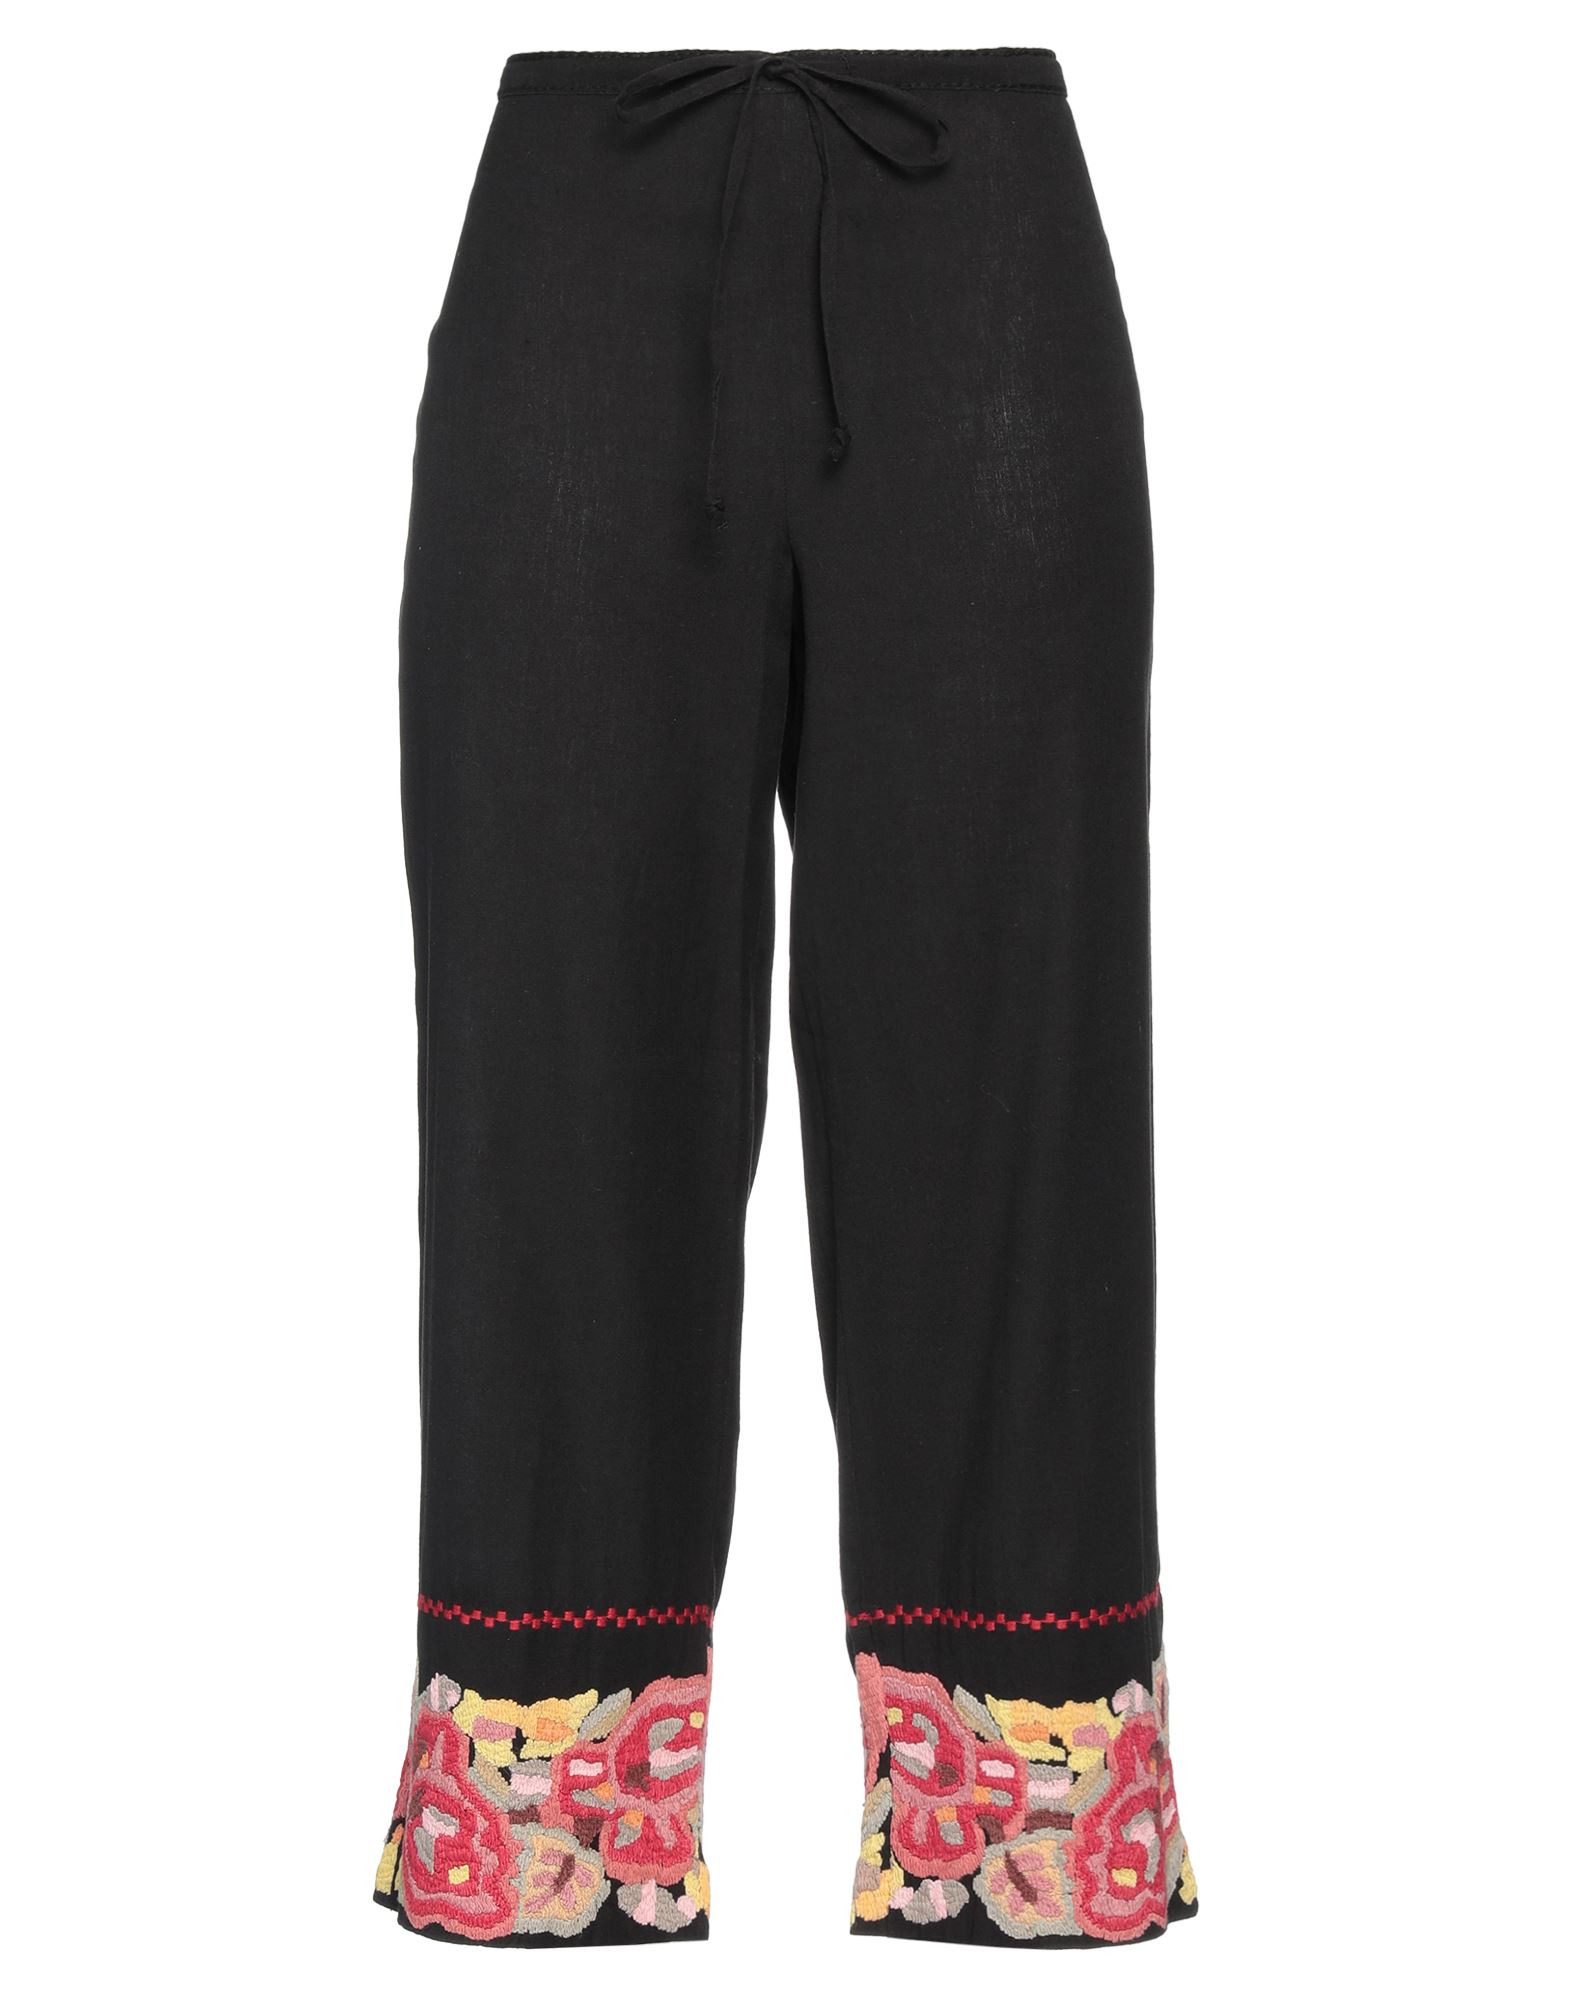 Attic And Barn Pants In Black